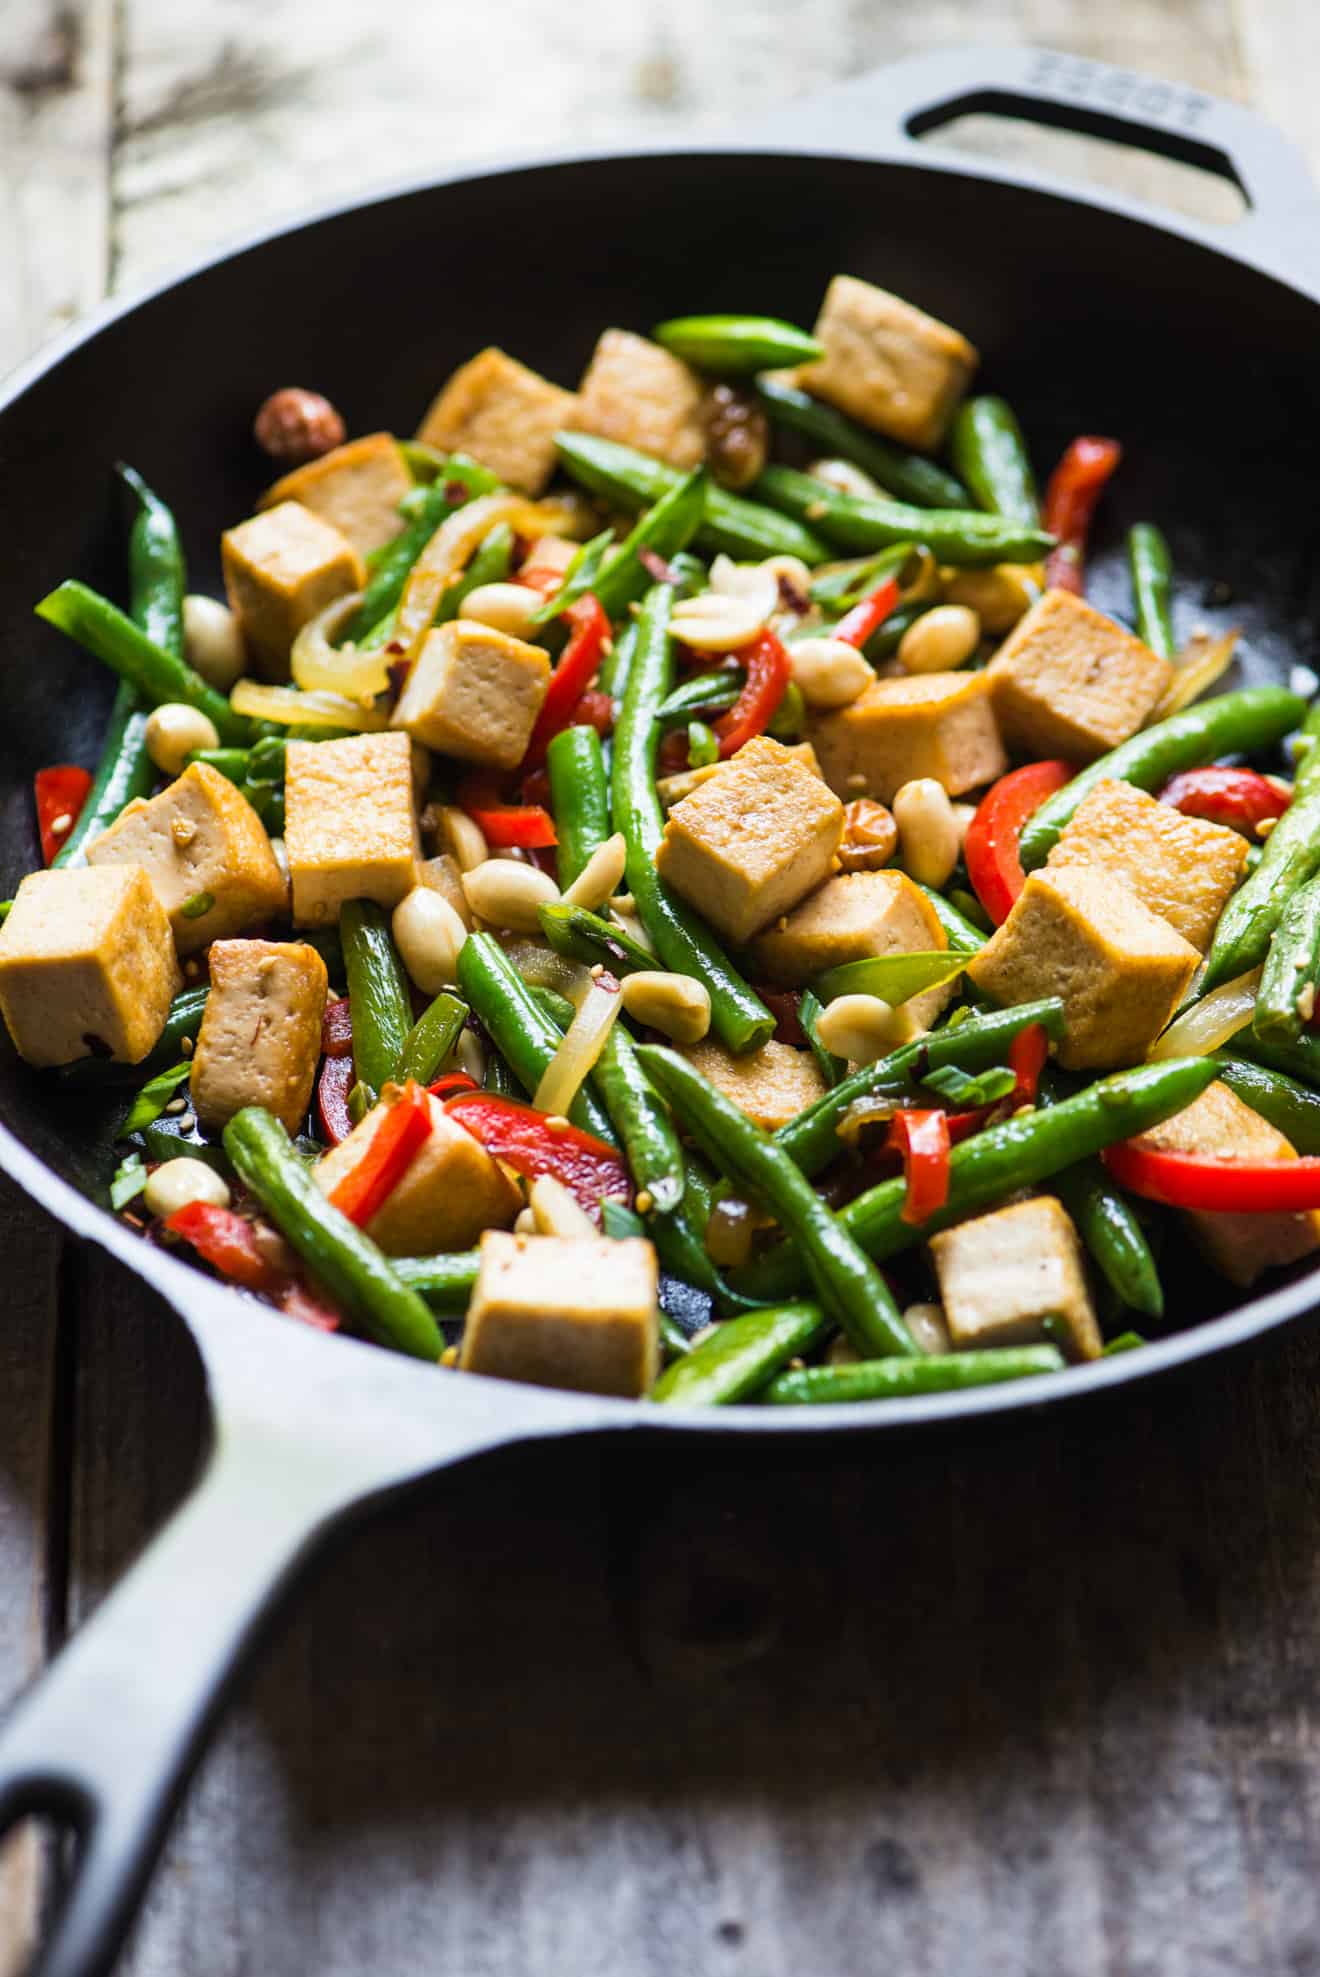 Kung Pao Tofu Stir Fry - easy and healthy stir fry that takes only 30 minutes to make!